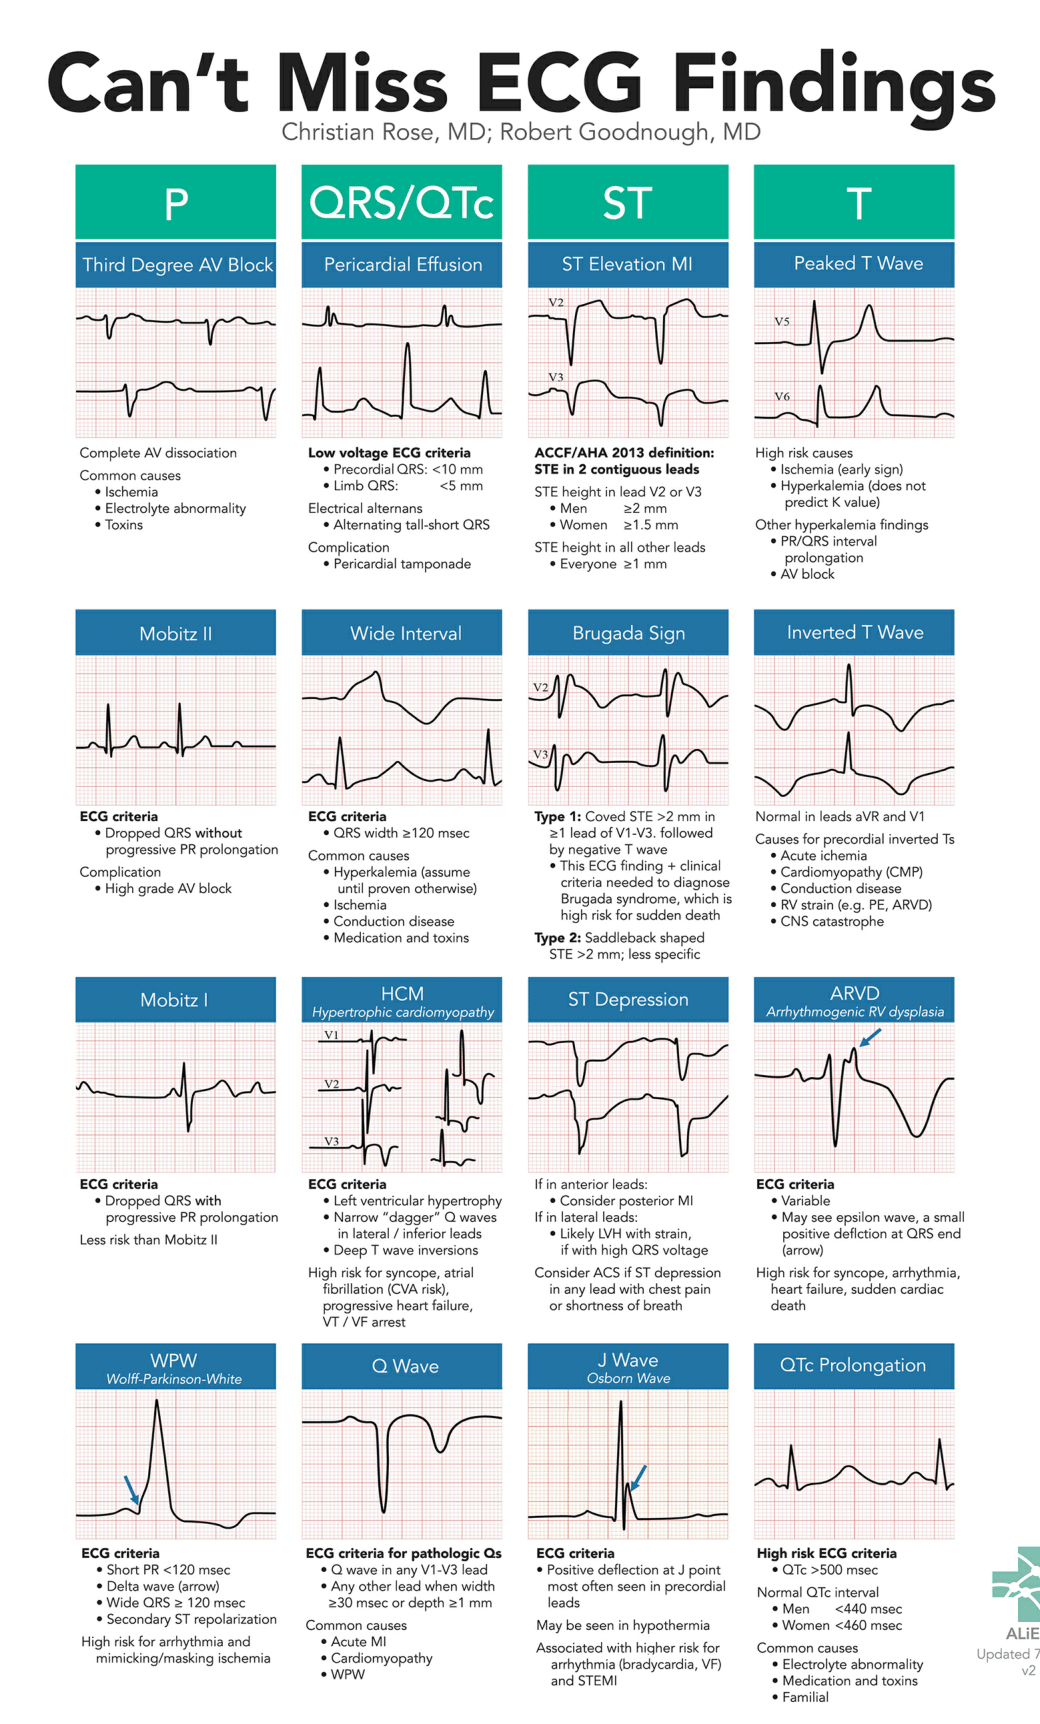 Can’t Miss ECG Findings Cards for the Emergency Medicine Provider